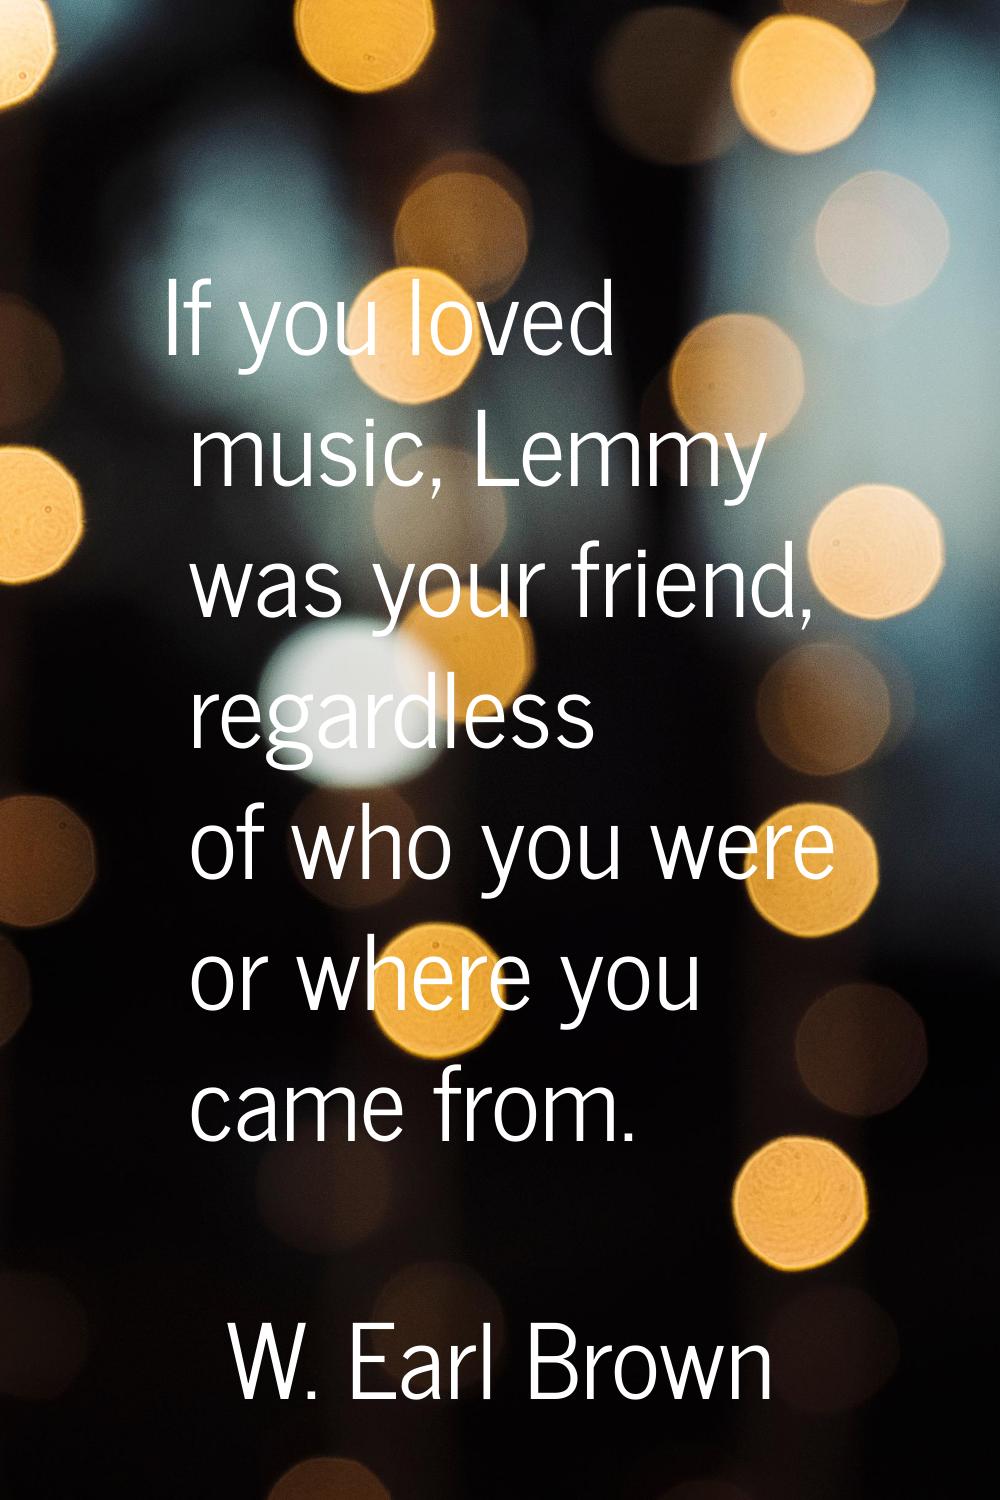 If you loved music, Lemmy was your friend, regardless of who you were or where you came from.